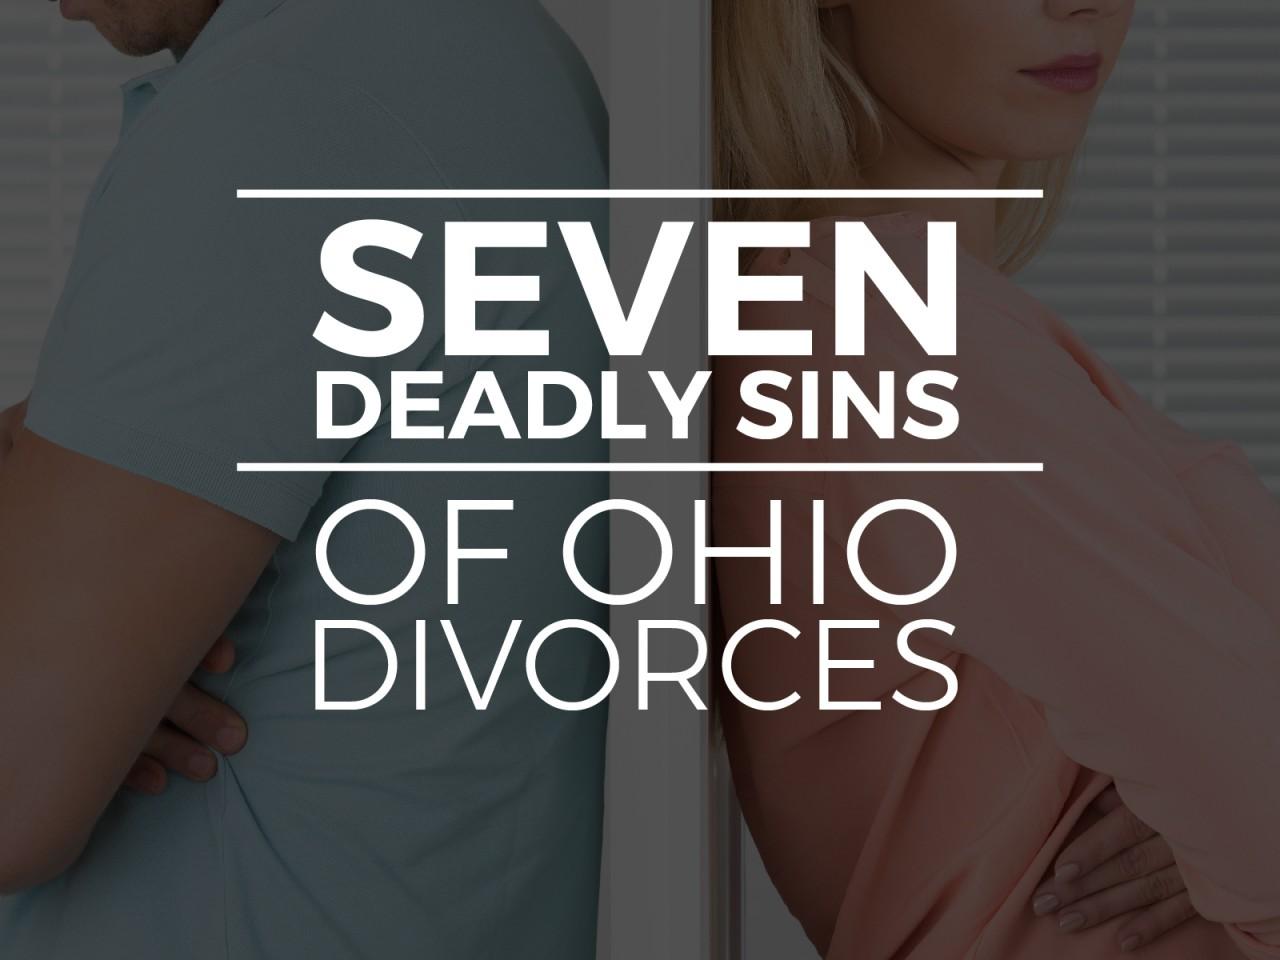 The Seven Deadly Sins of Ohio Divorces